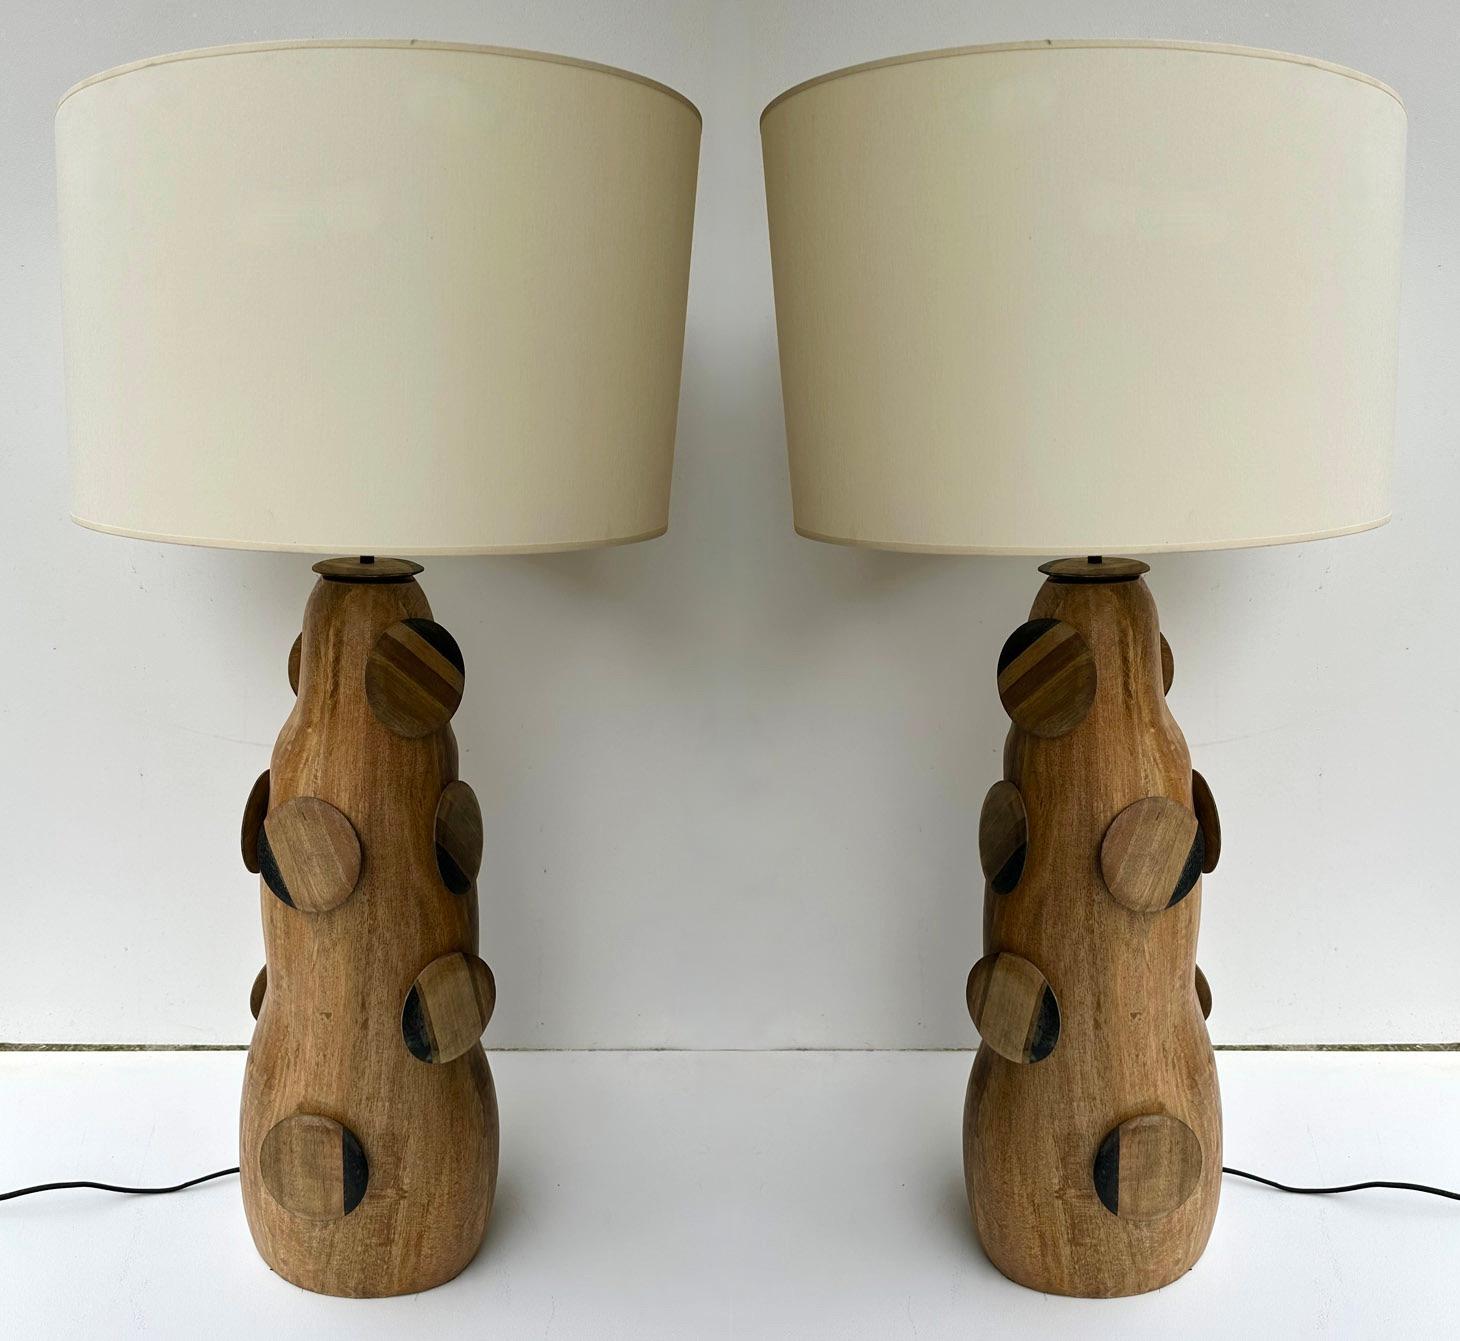 Contemporary Pair of Wood Discs Lamps, Italy For Sale 11